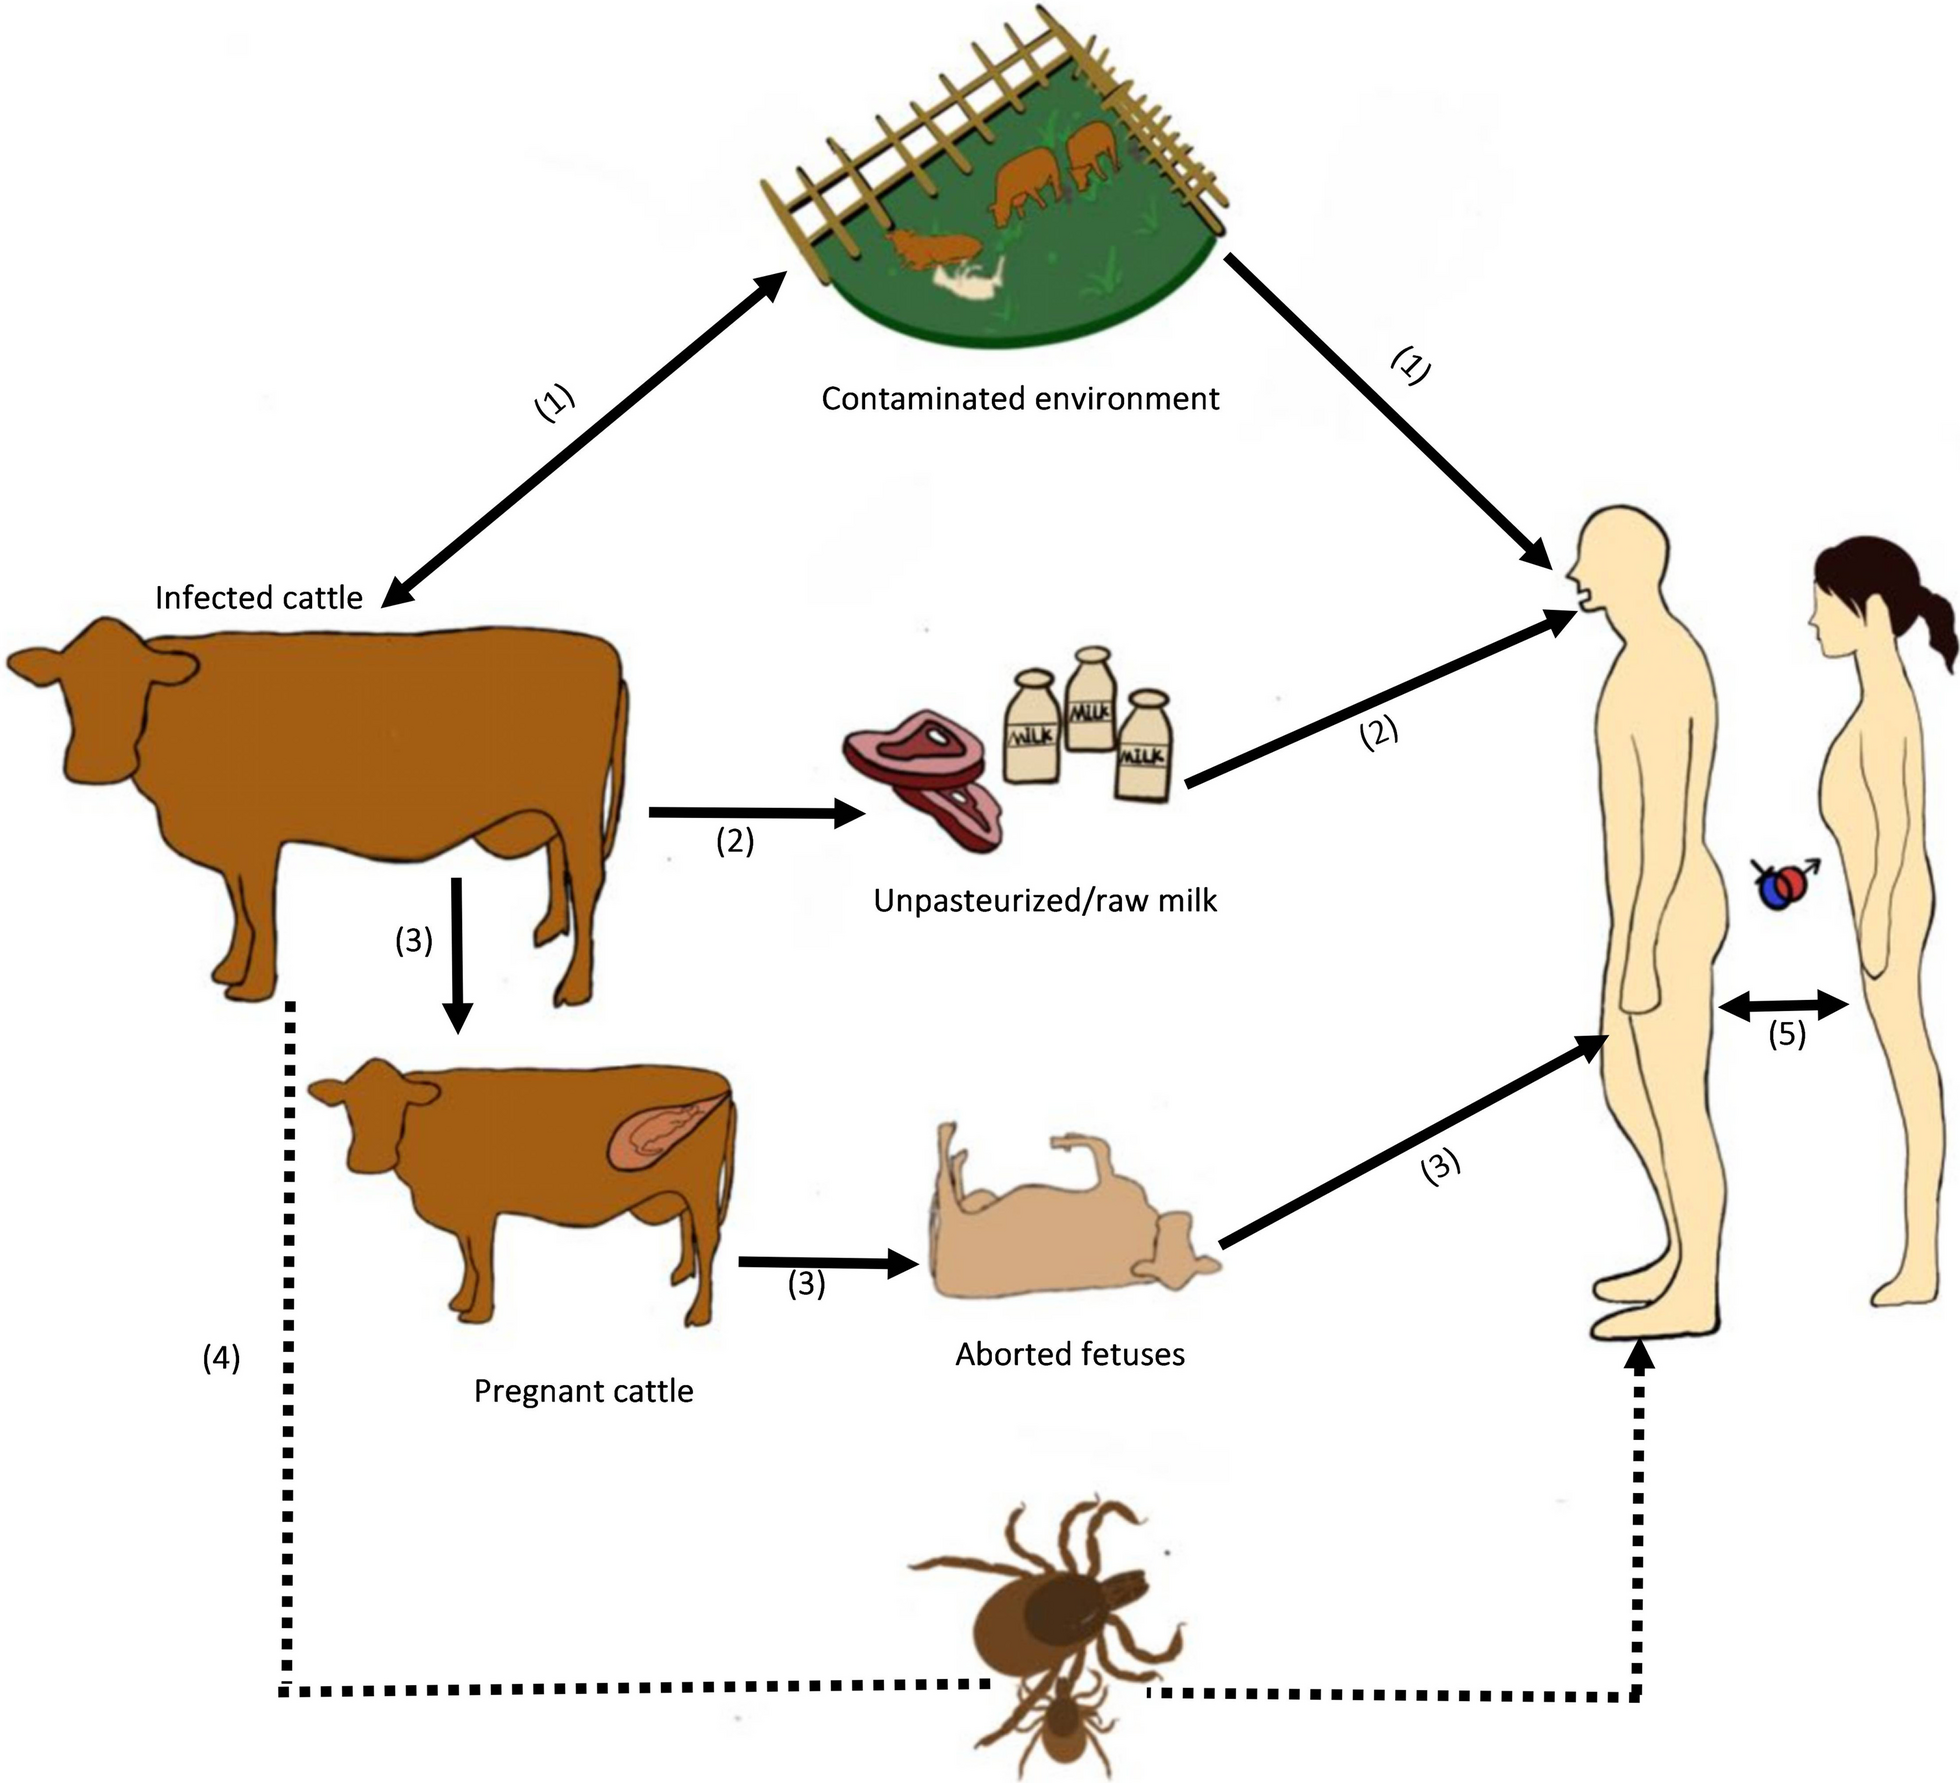 Evidence-practice gap analysis in the role of tick in brucellosis transmission: a scoping review